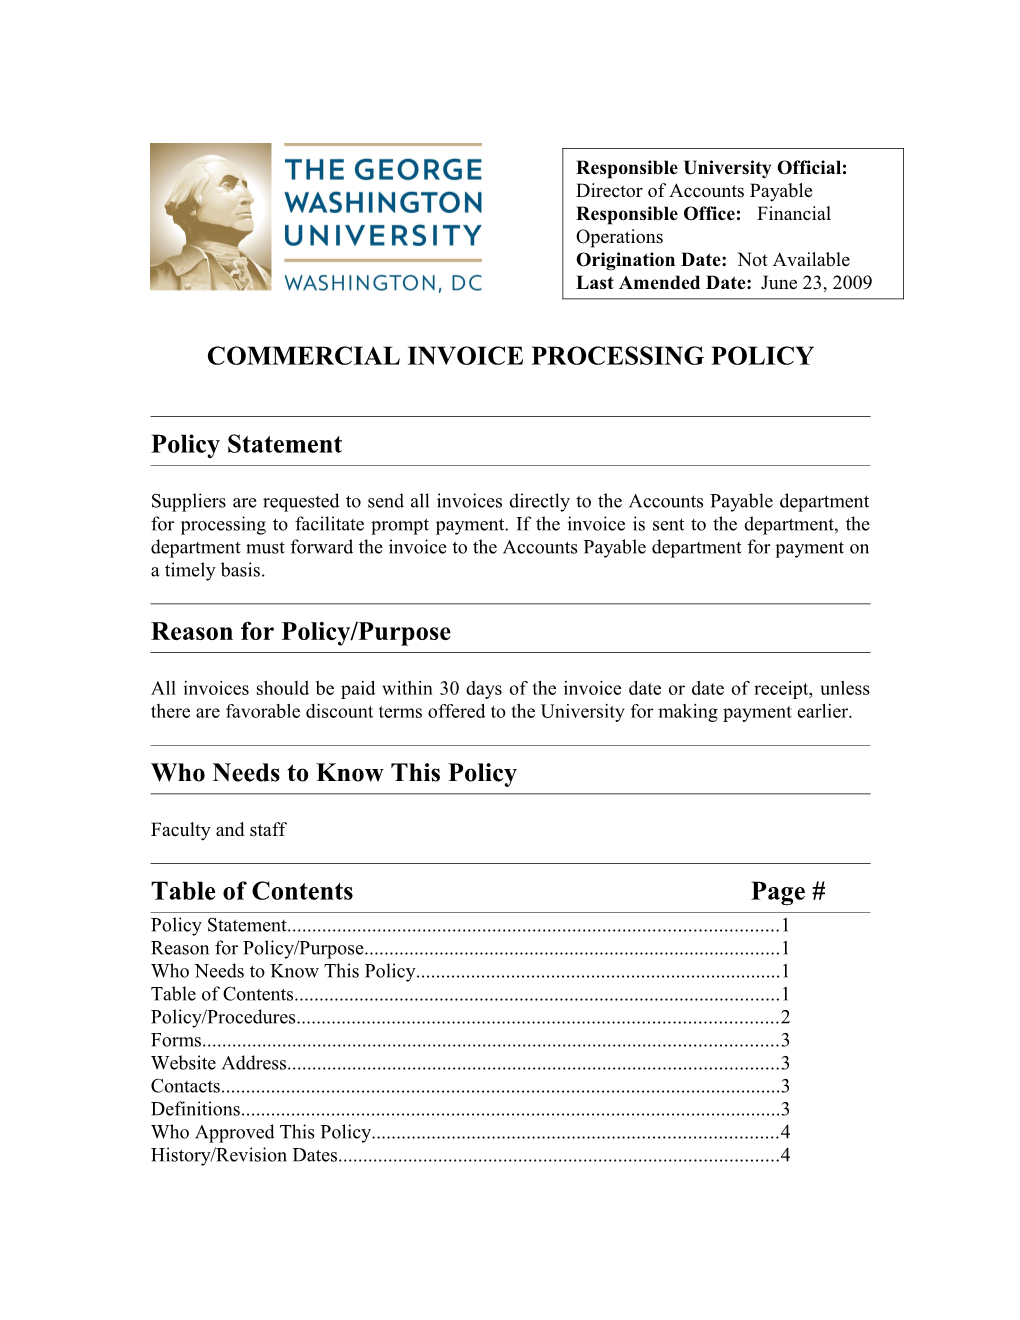 Commercial Invoice Processing Policy